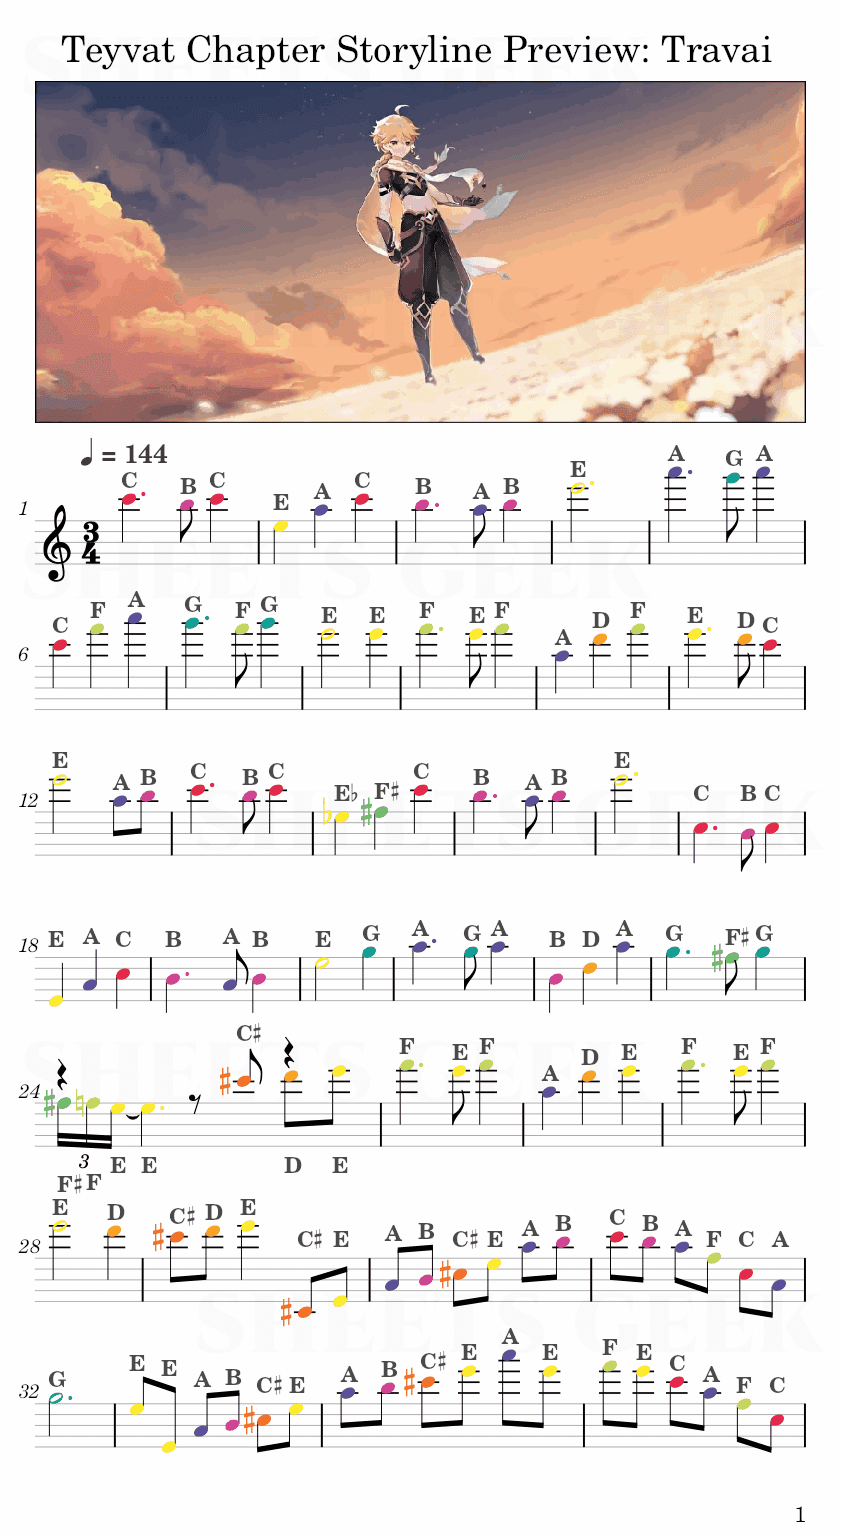 Teyvat Chapter Storyline Preview: Travai (Genshin Impact) Easy Sheet Music Free for piano, keyboard, flute, violin, sax, cello page 1